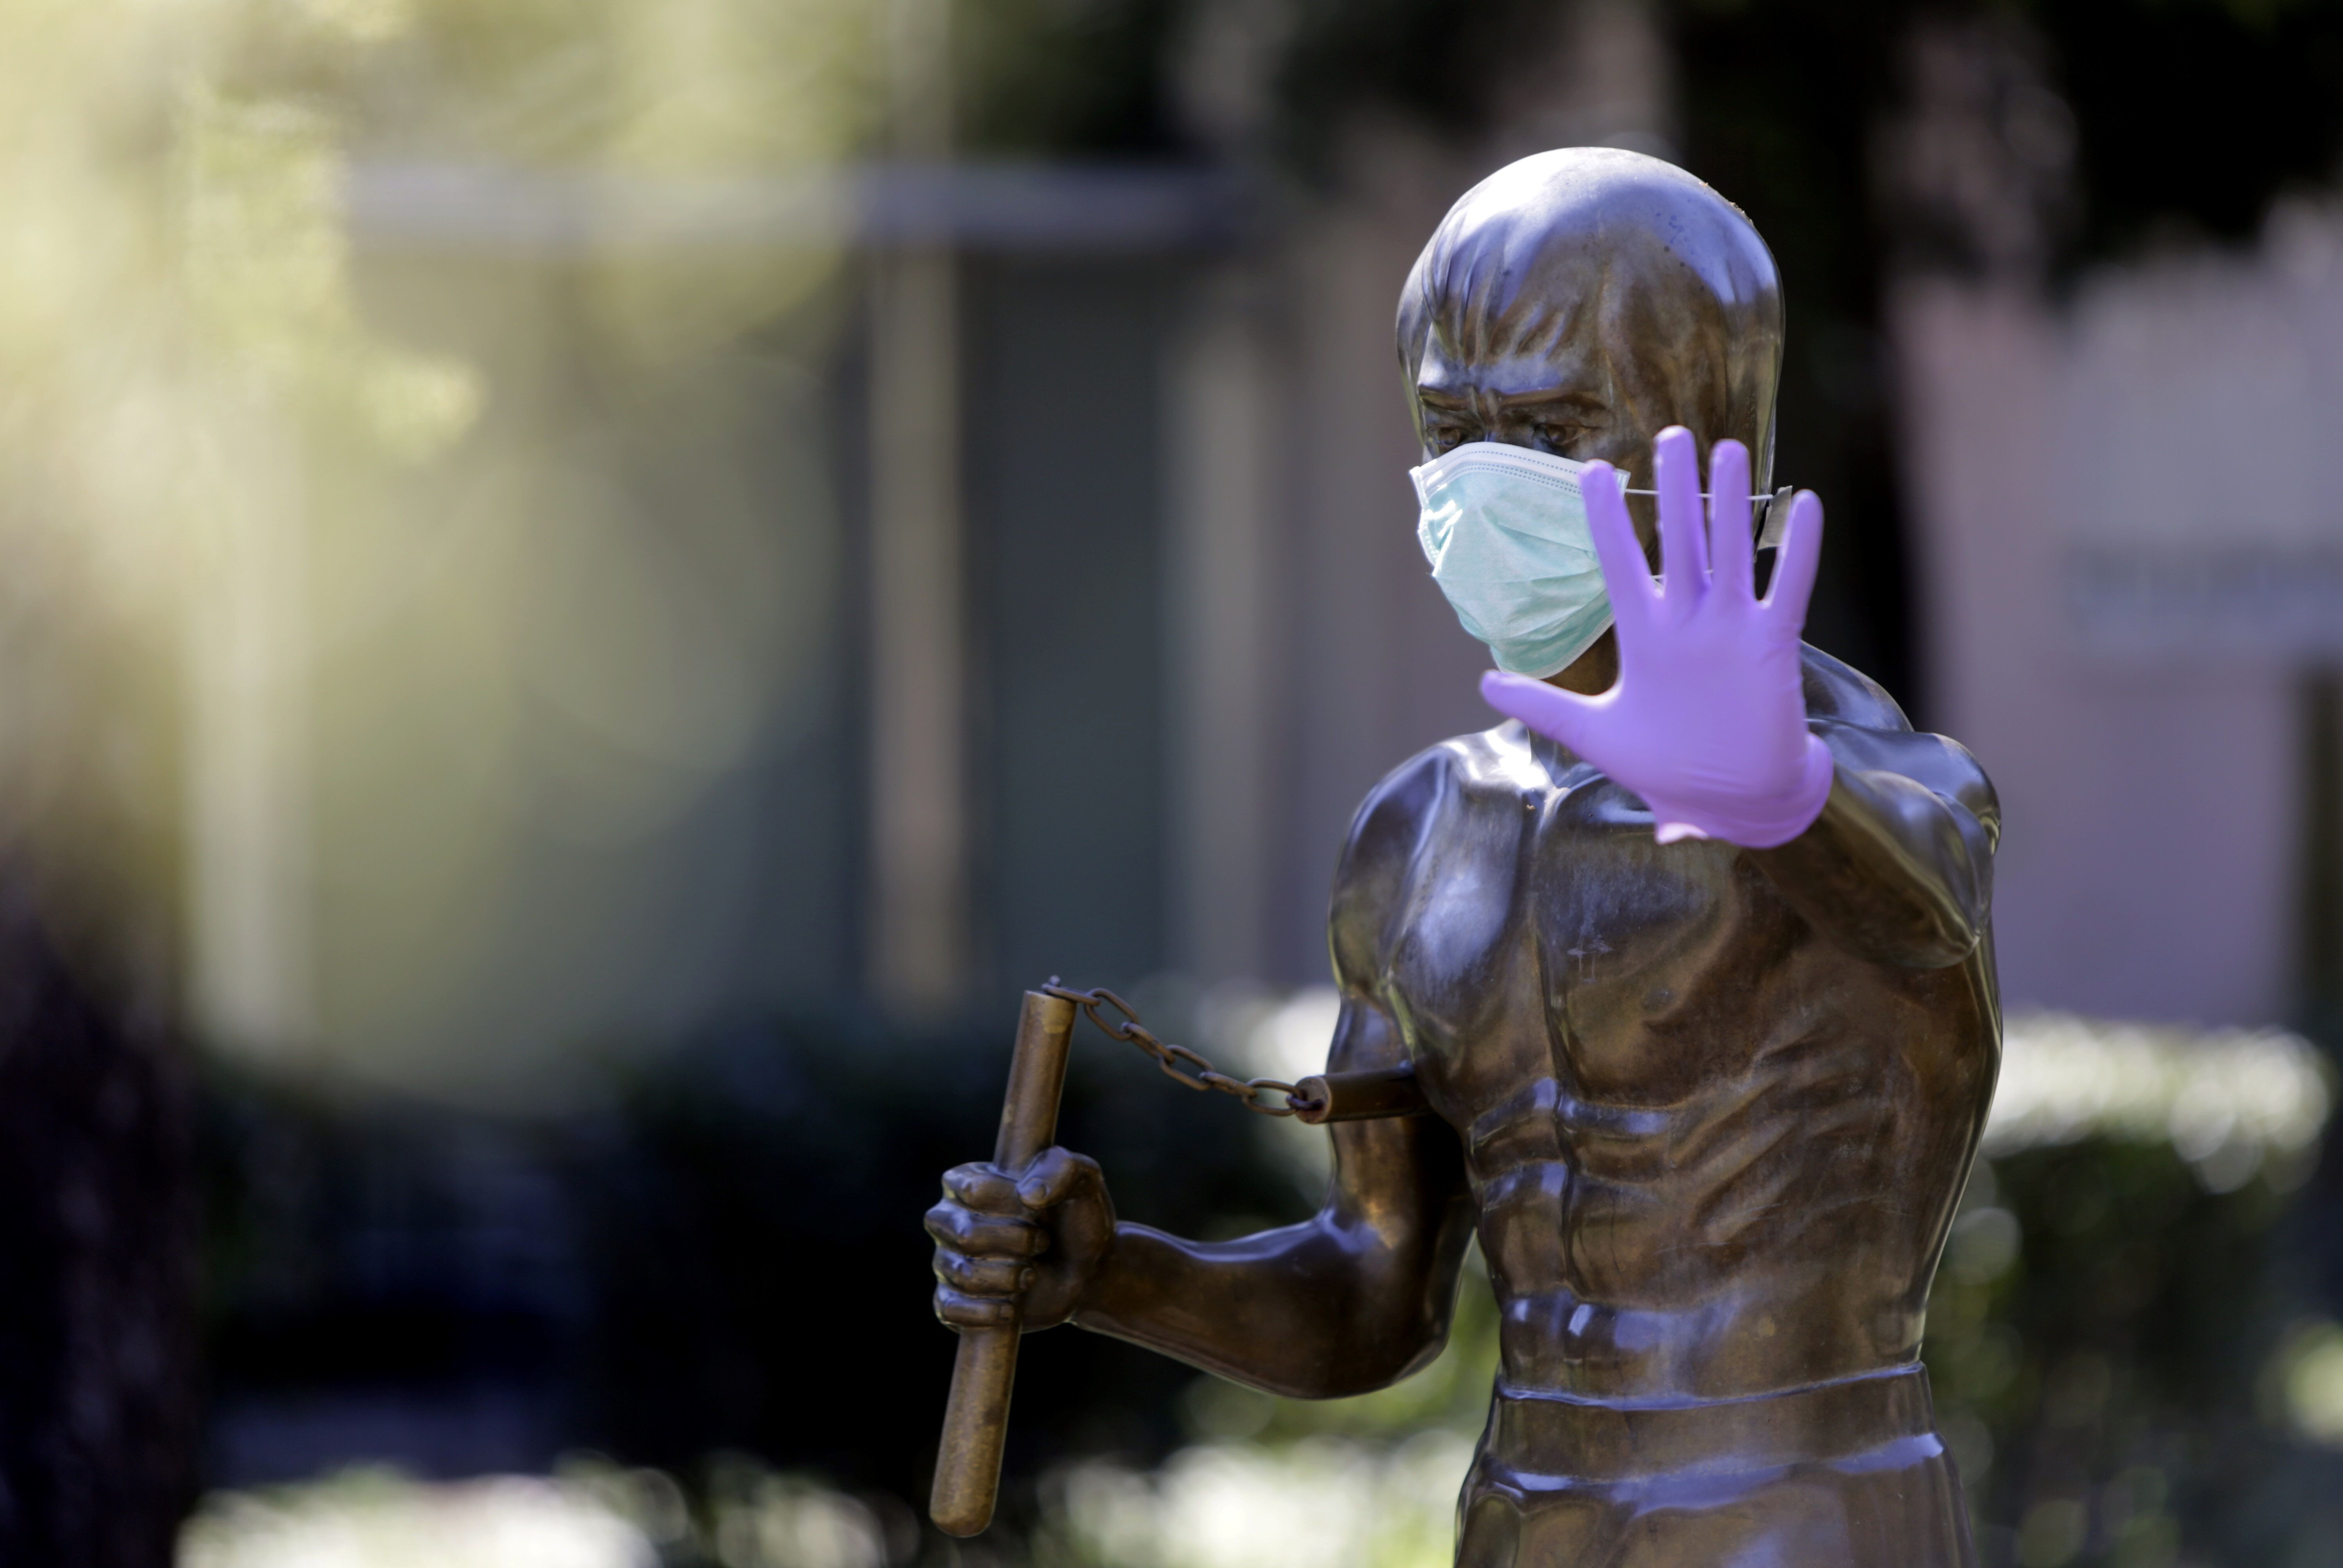 A picture taken on April 2, 2020, shows the Mostar statue dedicated to martial arts icon and actor Bruce Lee, wearing surgical gloves and a face mask. Photo: AFP